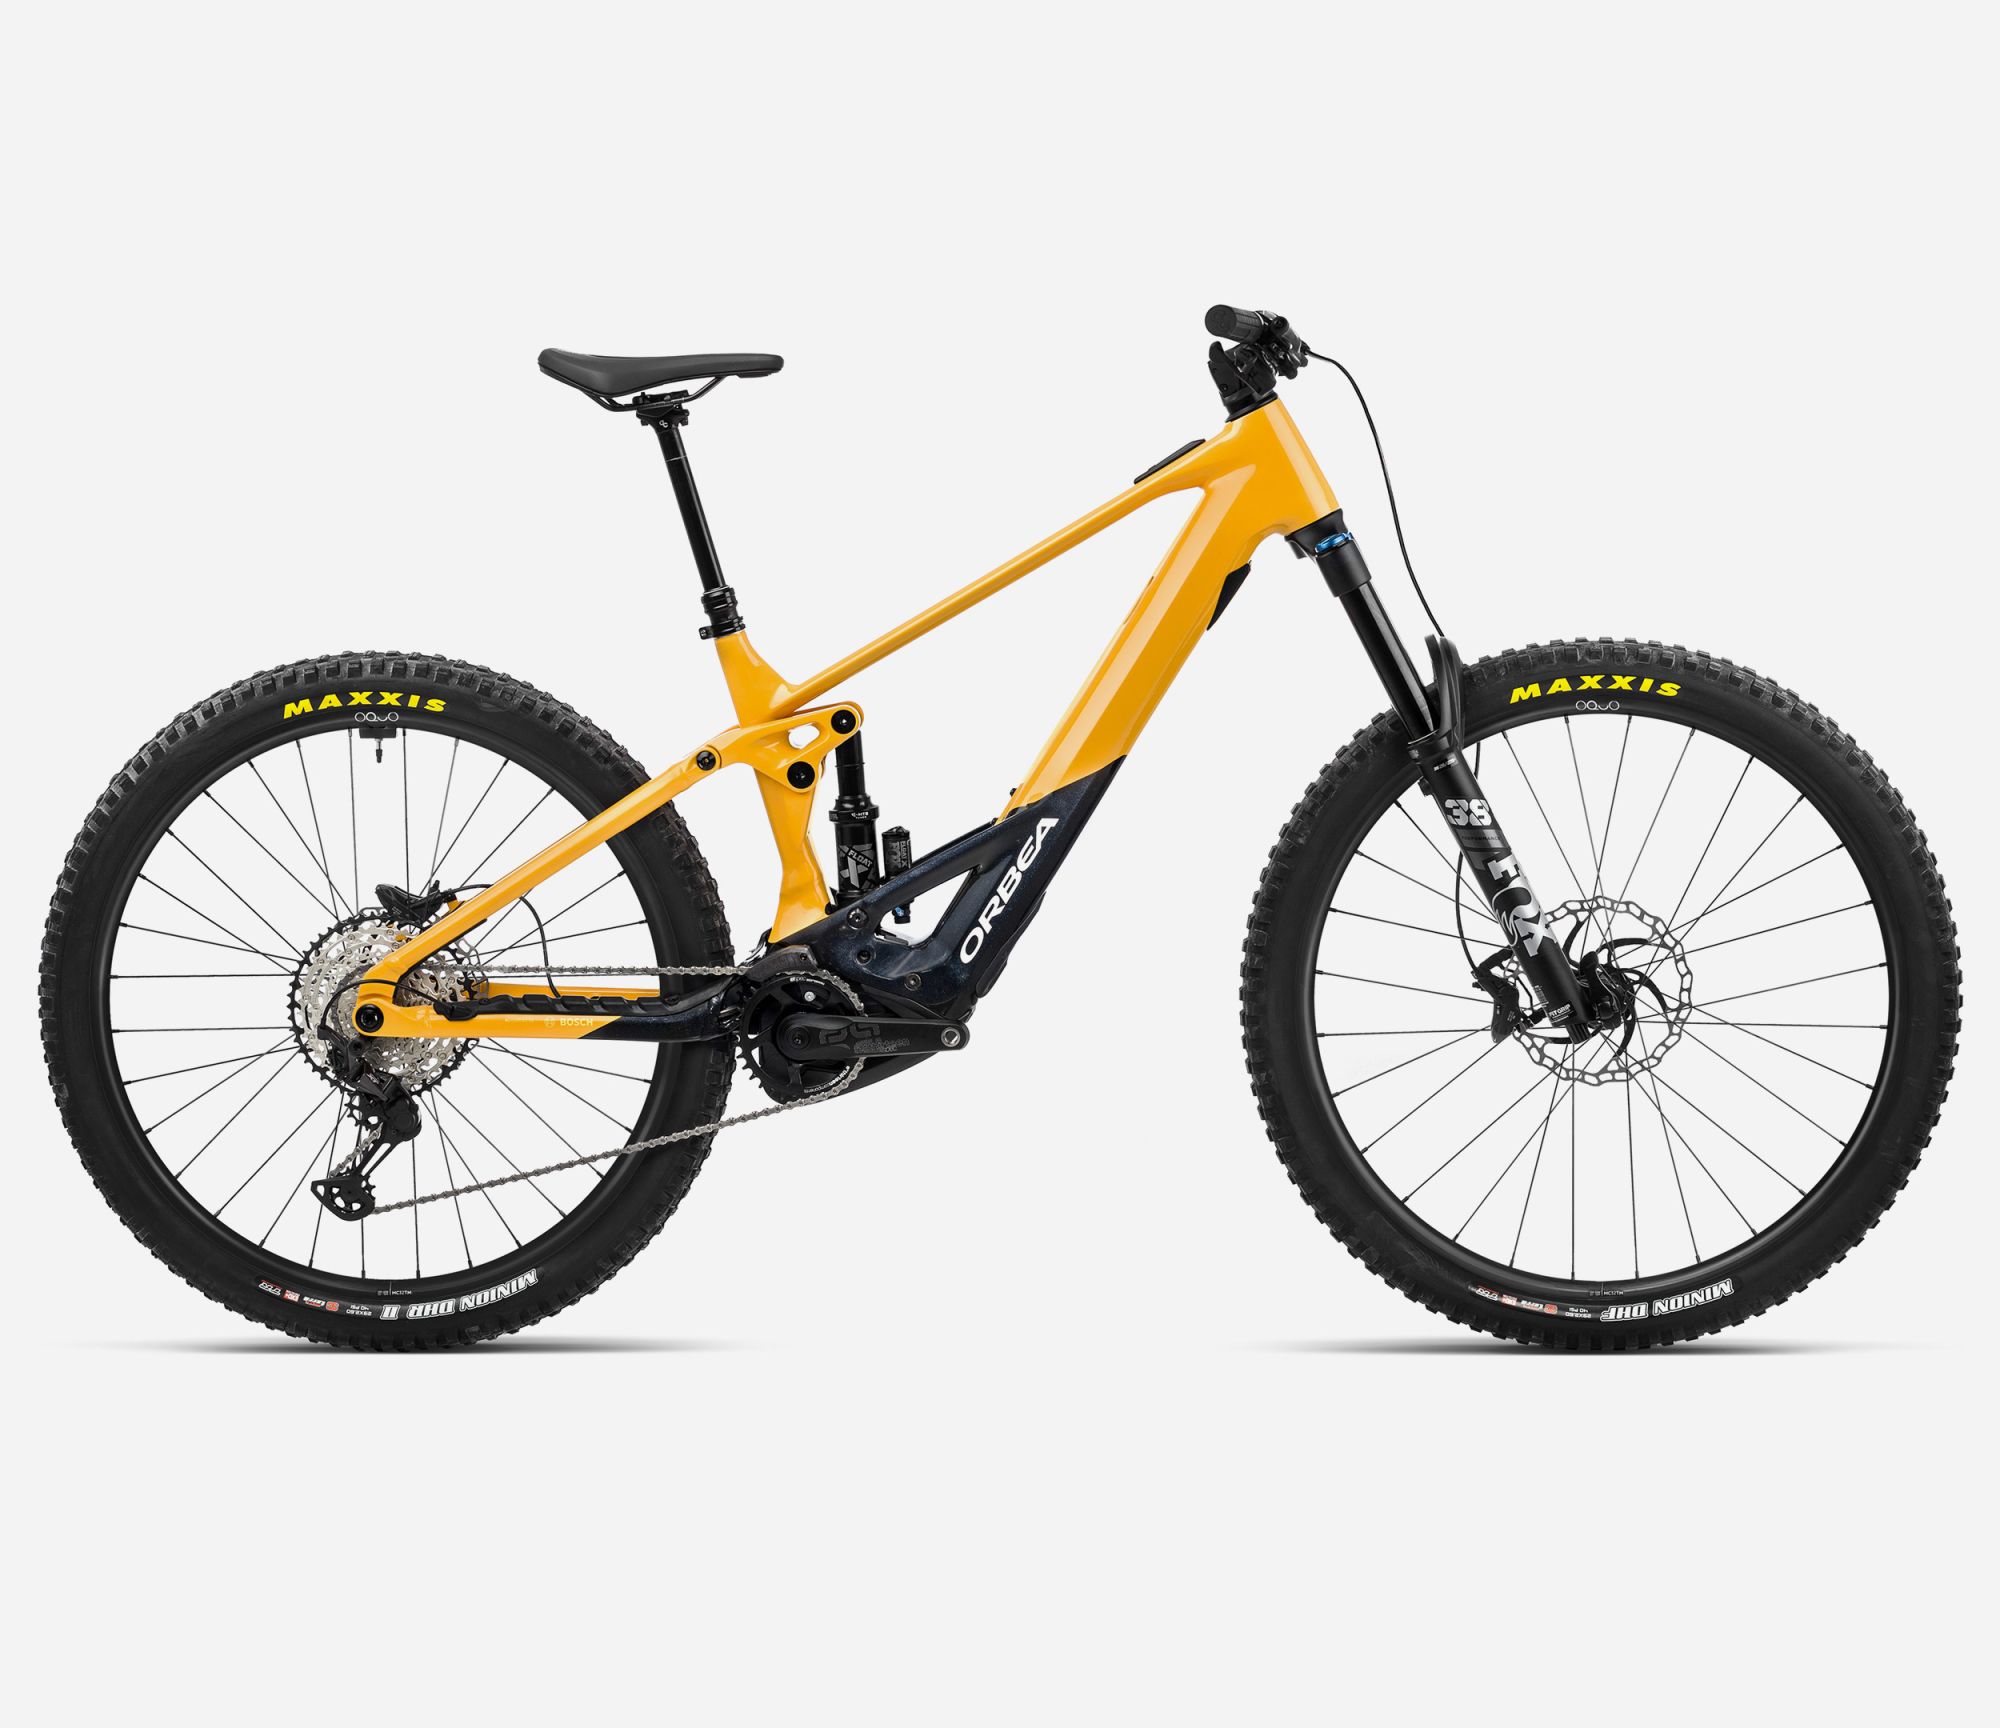 Full Assistance Electric Bikes